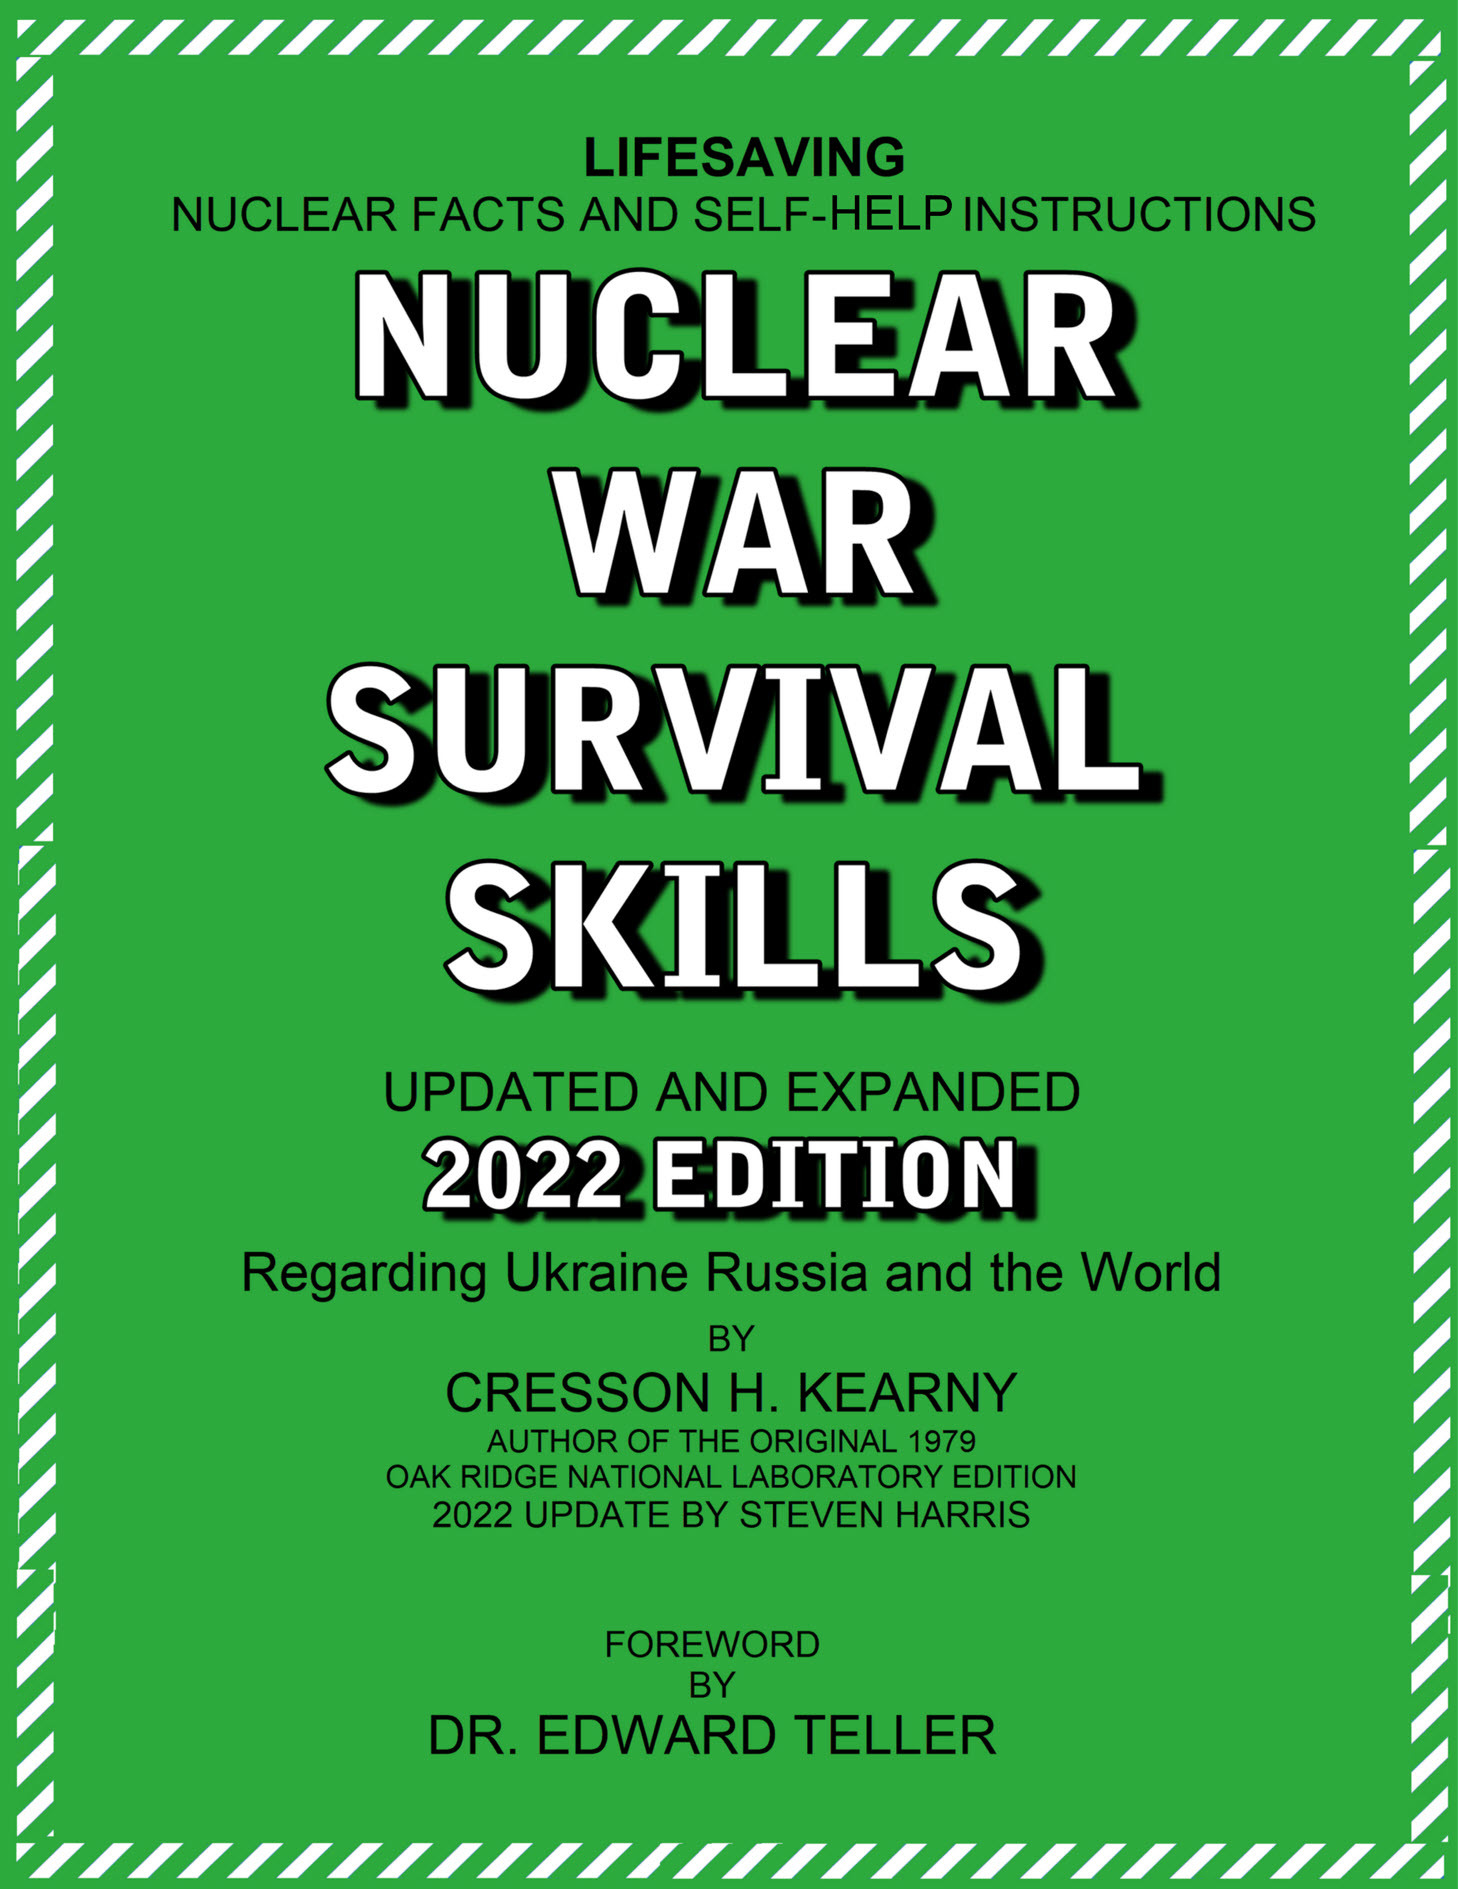 nuclear war survival skills revised 2022 edition book cover image - steven harris cresson kearny